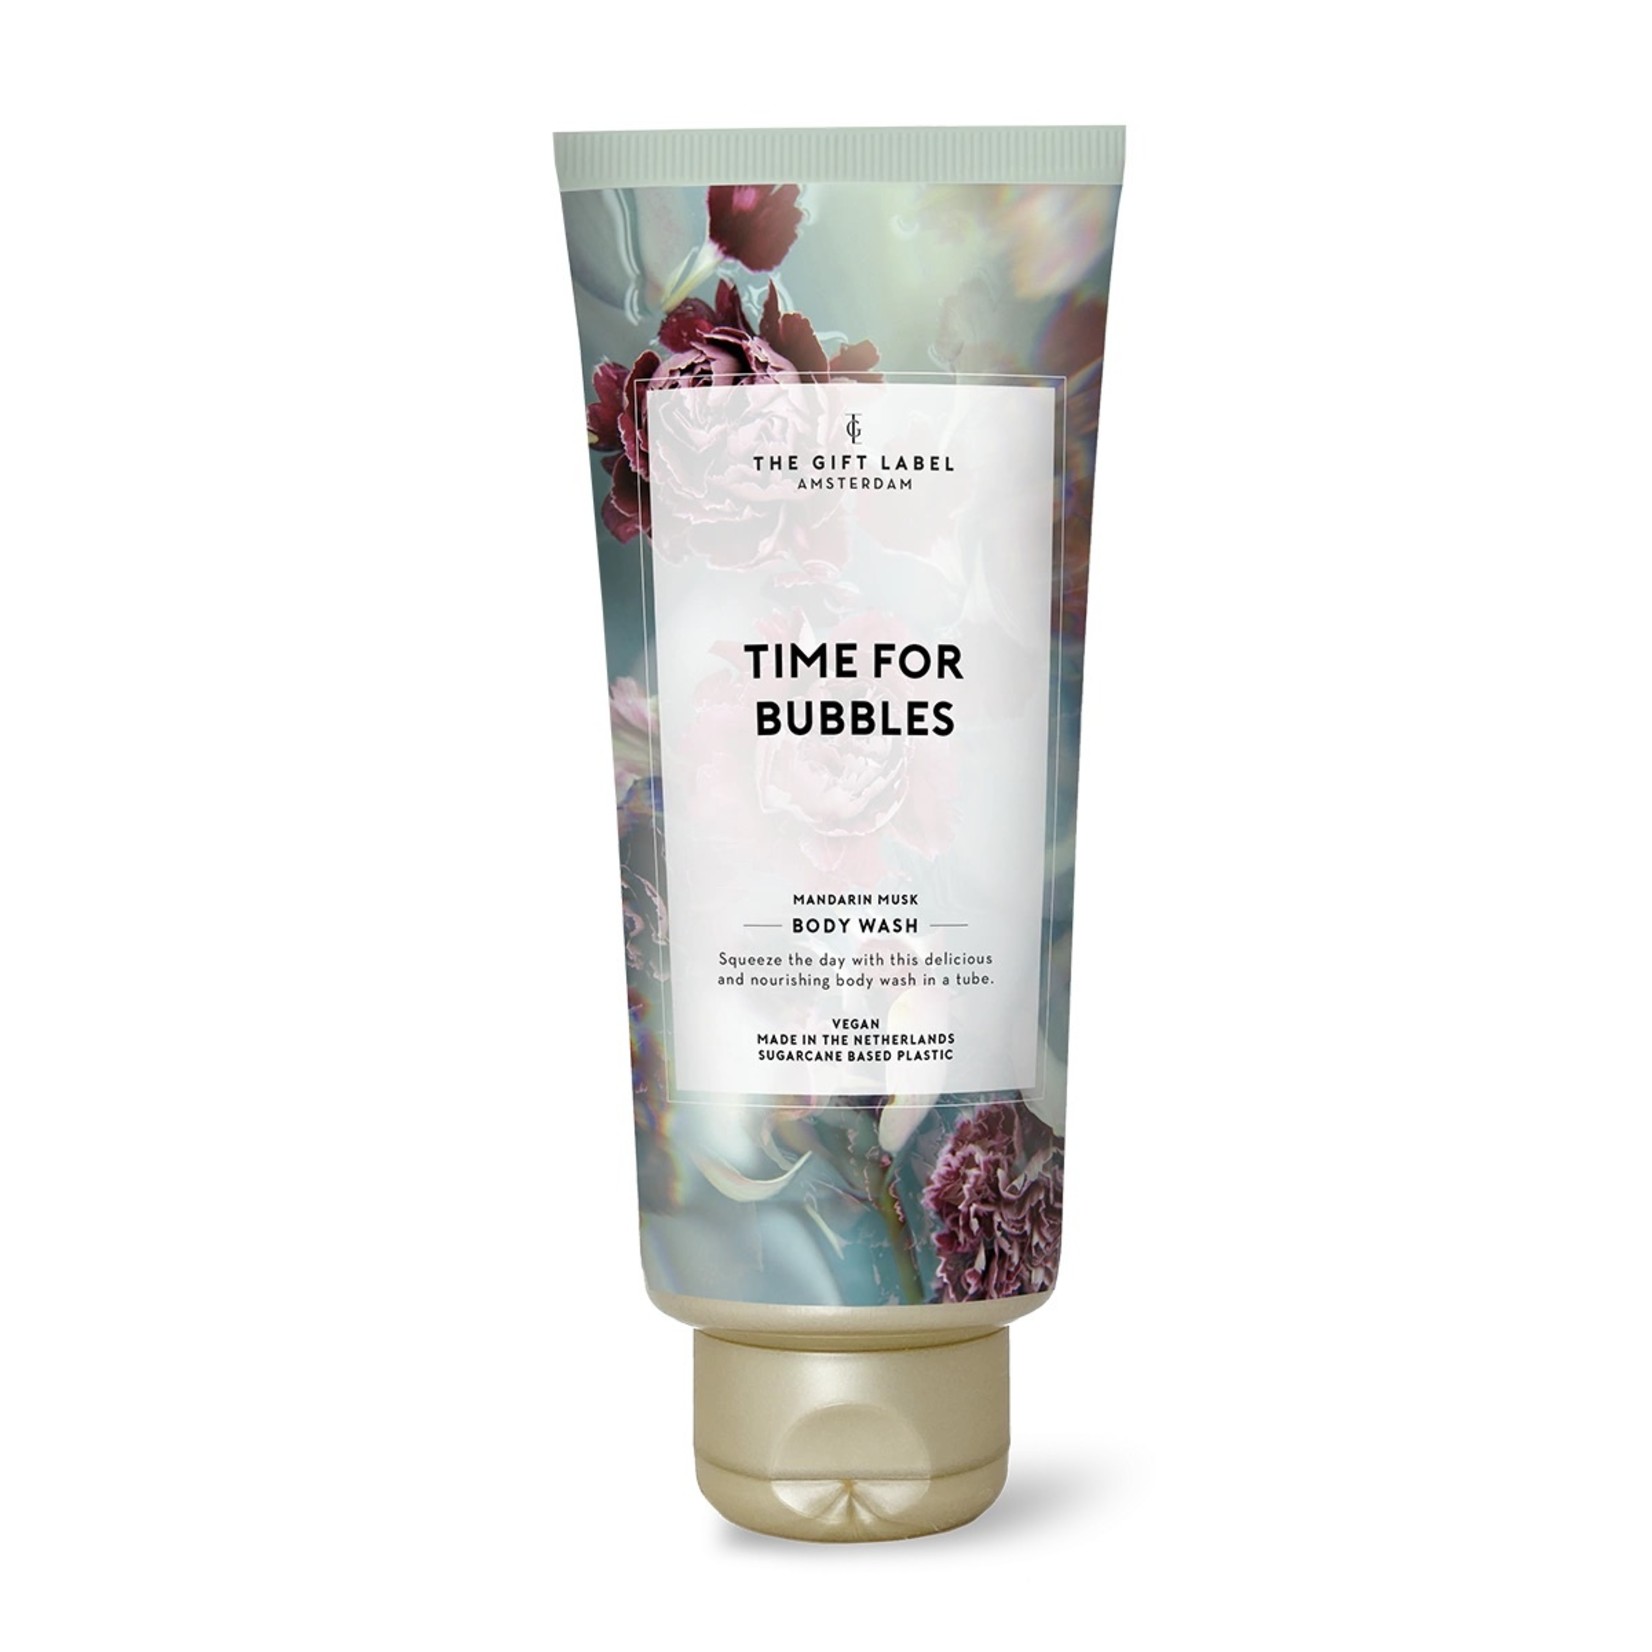 THE GIFT LABEL BODY WASH TIME FOR BUBBLES